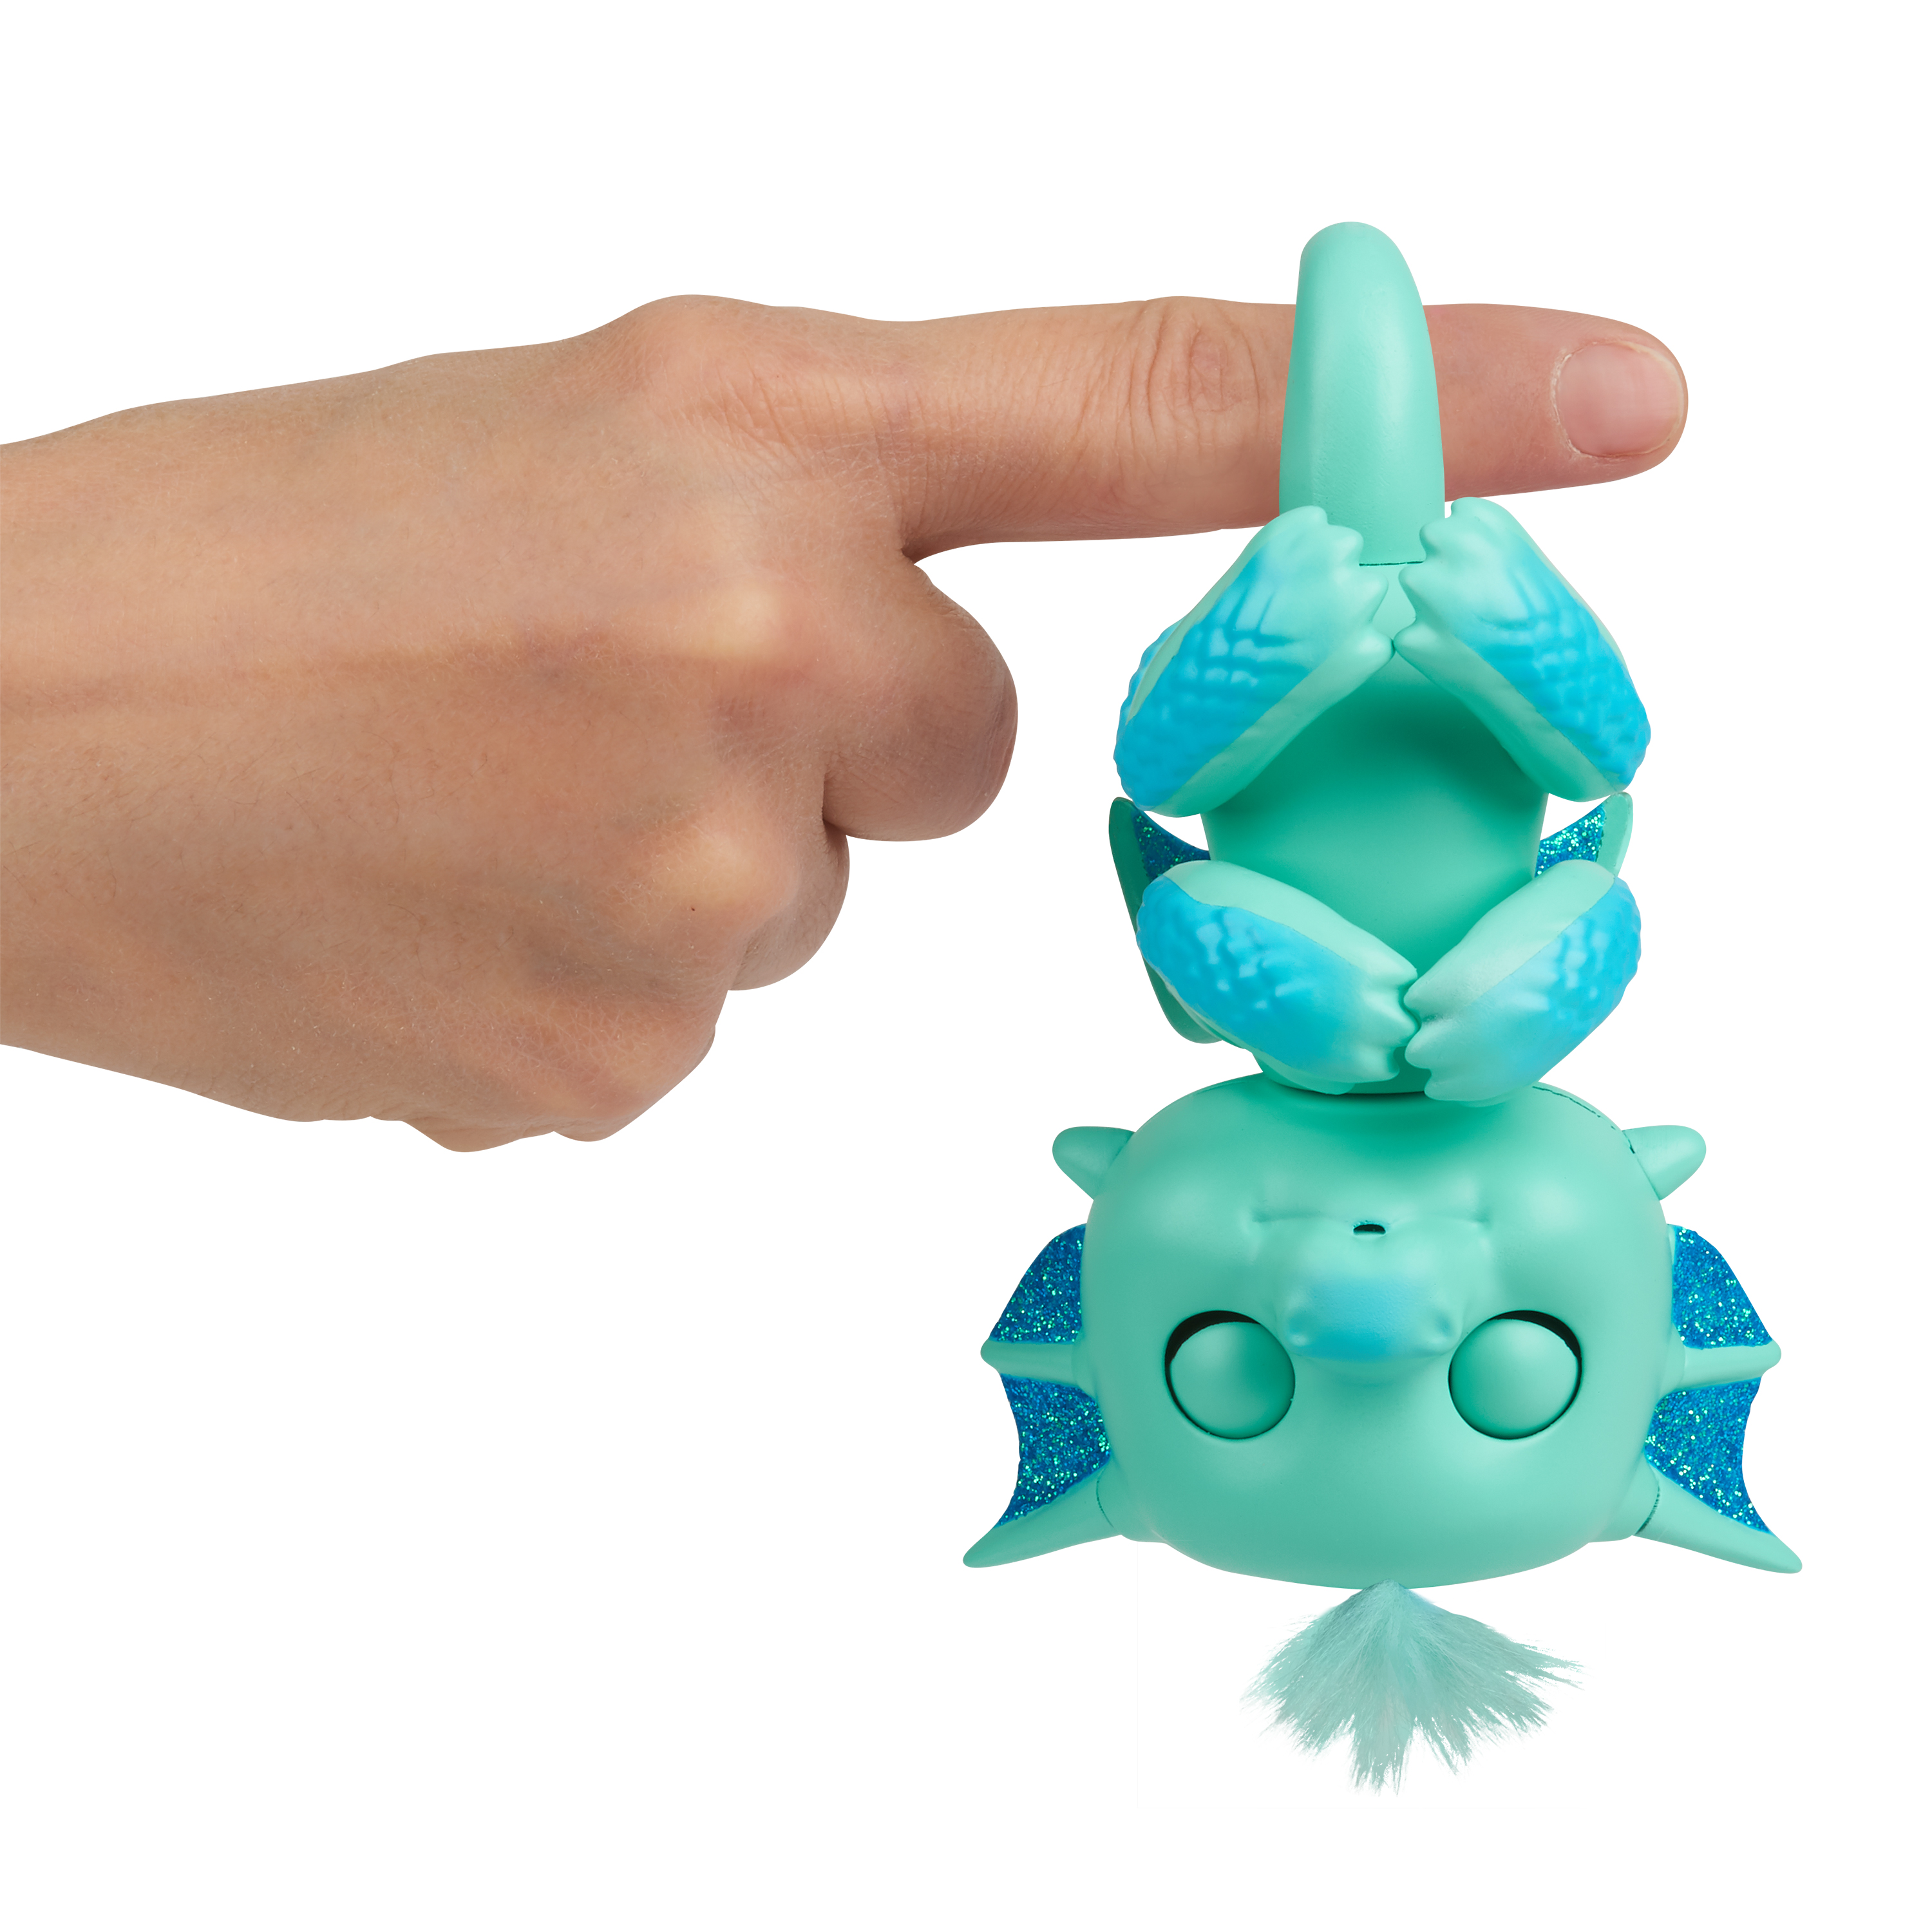 Fingerlings - Glitter Dragon - Noa (Green with Blue) - Interactive Baby Collectible Pet - By WowWee - image 5 of 10